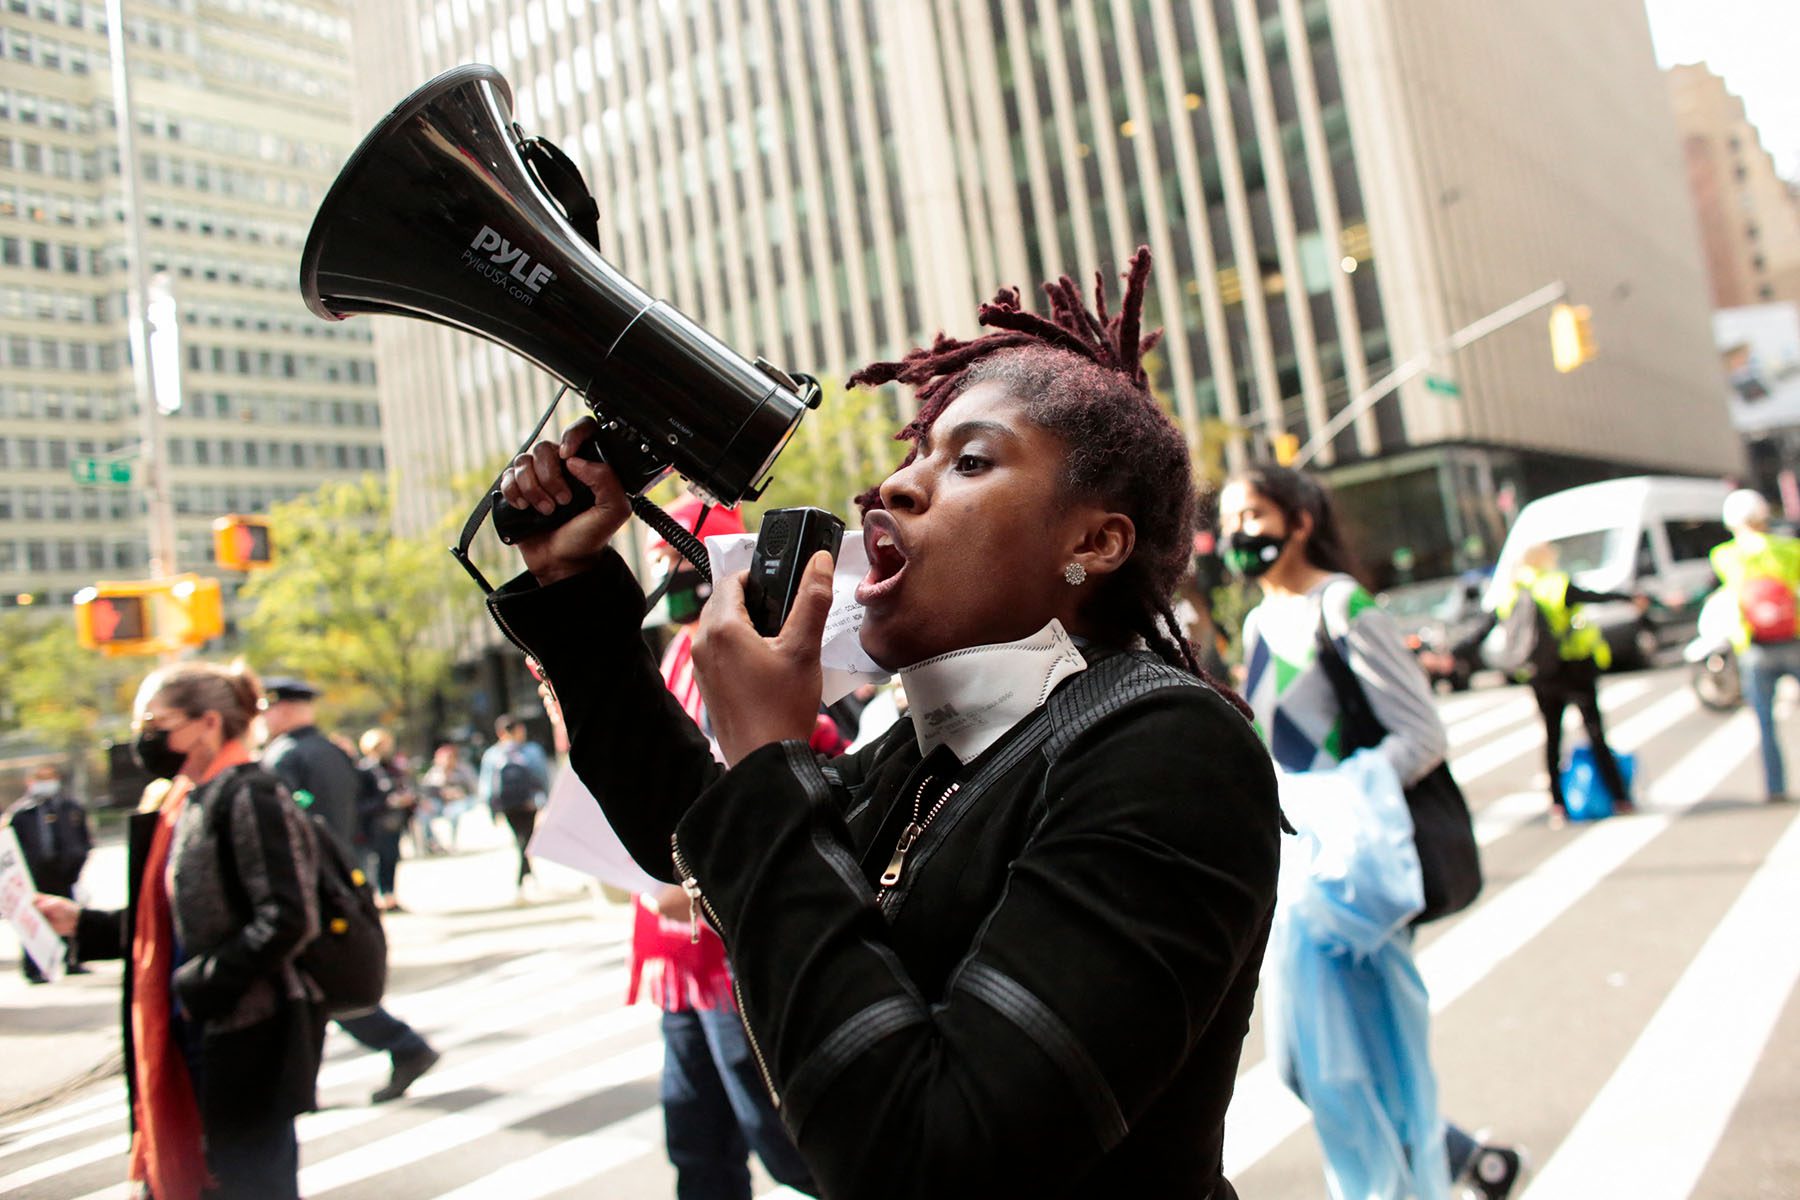 A demonstrator shouts slogans through a megaphone as she marches.